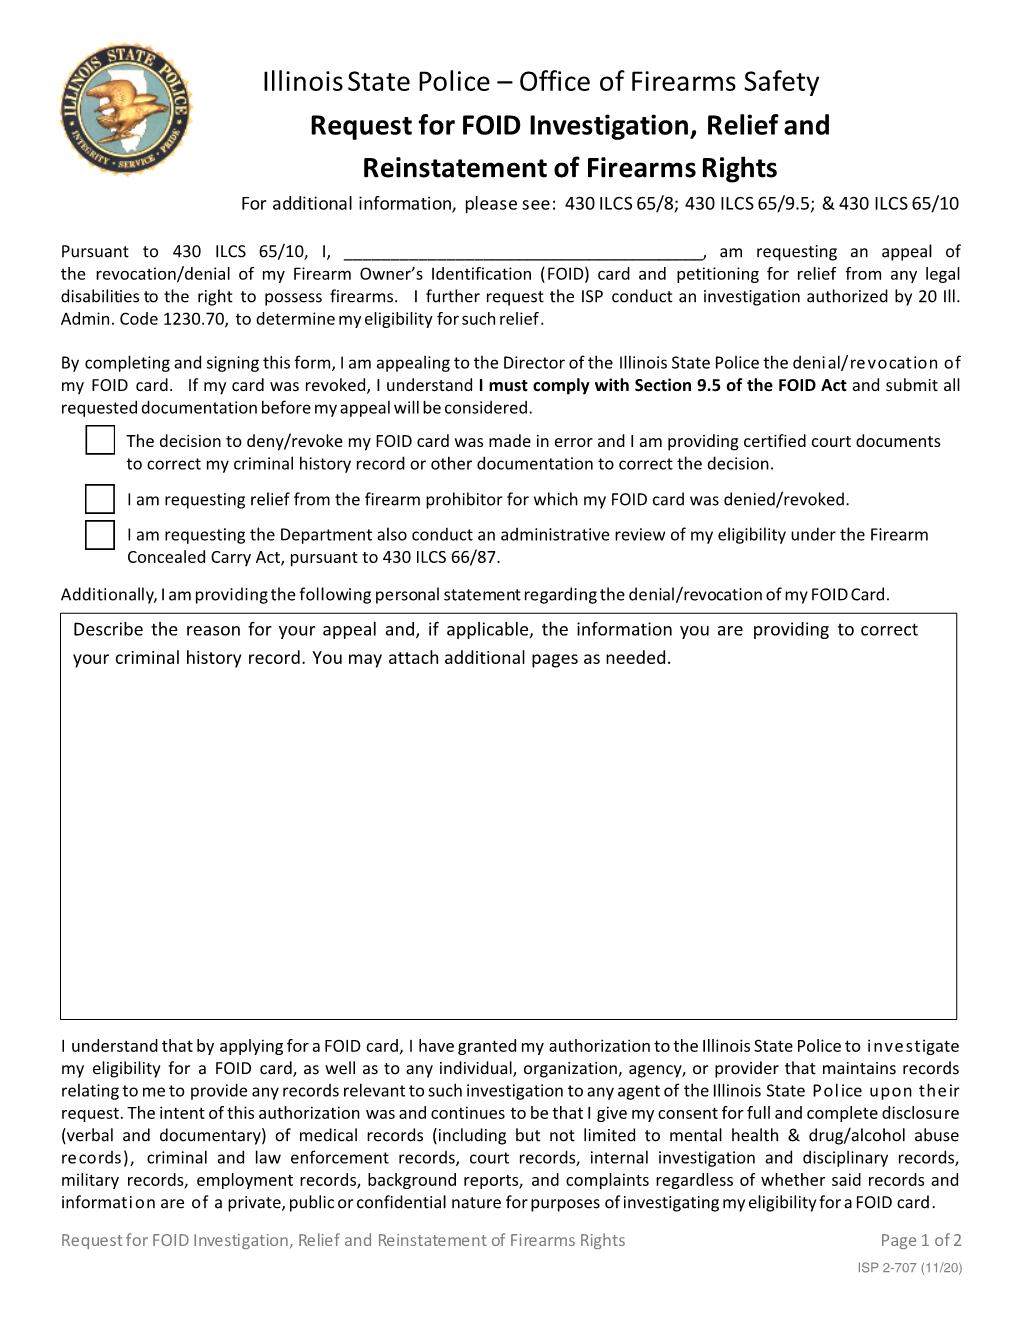 Office of Firearms Safety Request for FOID Investigation, Relief And